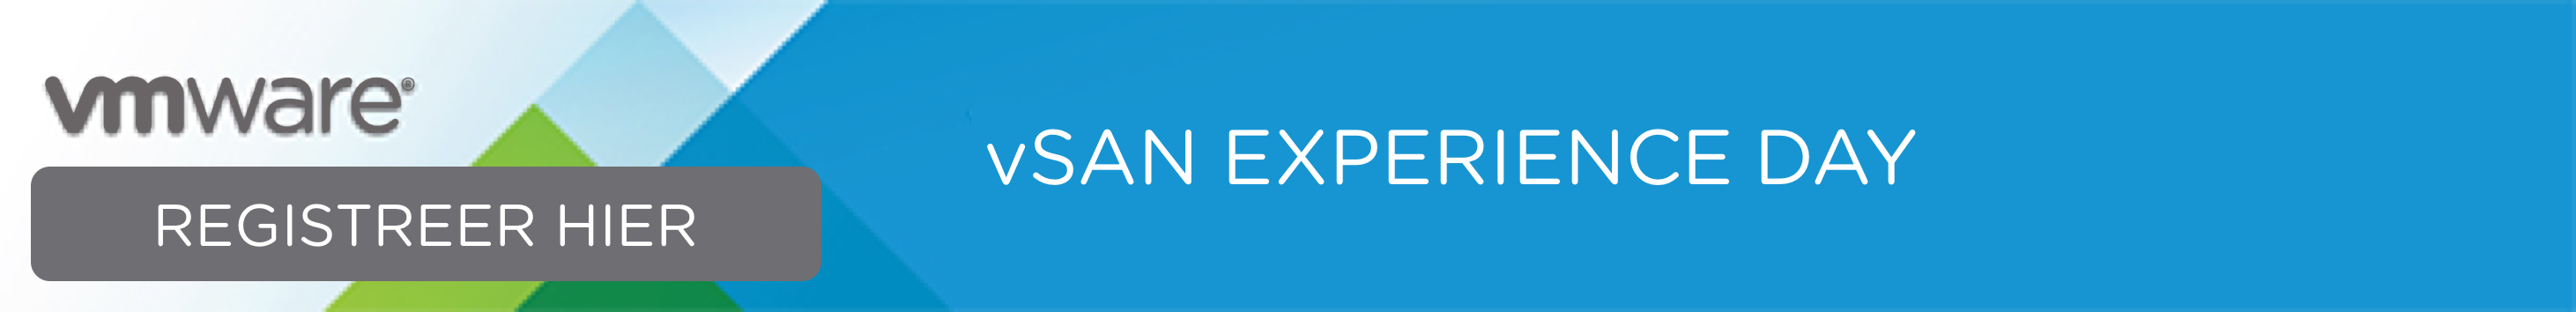 vSAN Experience Day